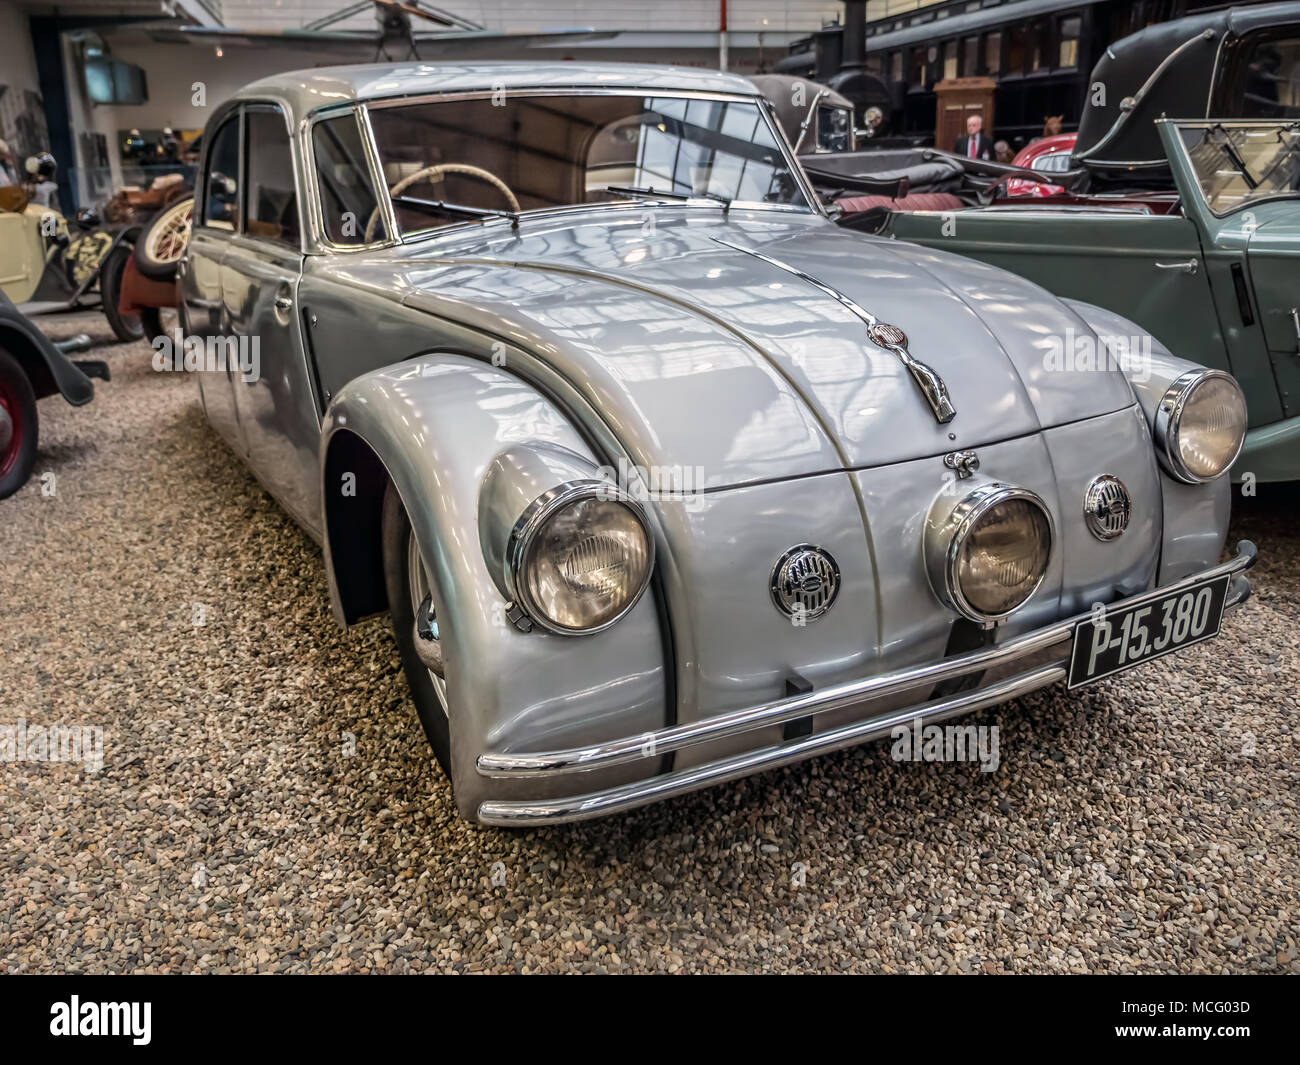 PRAGUE, CZECH REPUBLIC - MARCH 8 2017: Oldtimer Tatra 77a, from 1937, showcased in the National Technical Museum of Prague Stock Photo